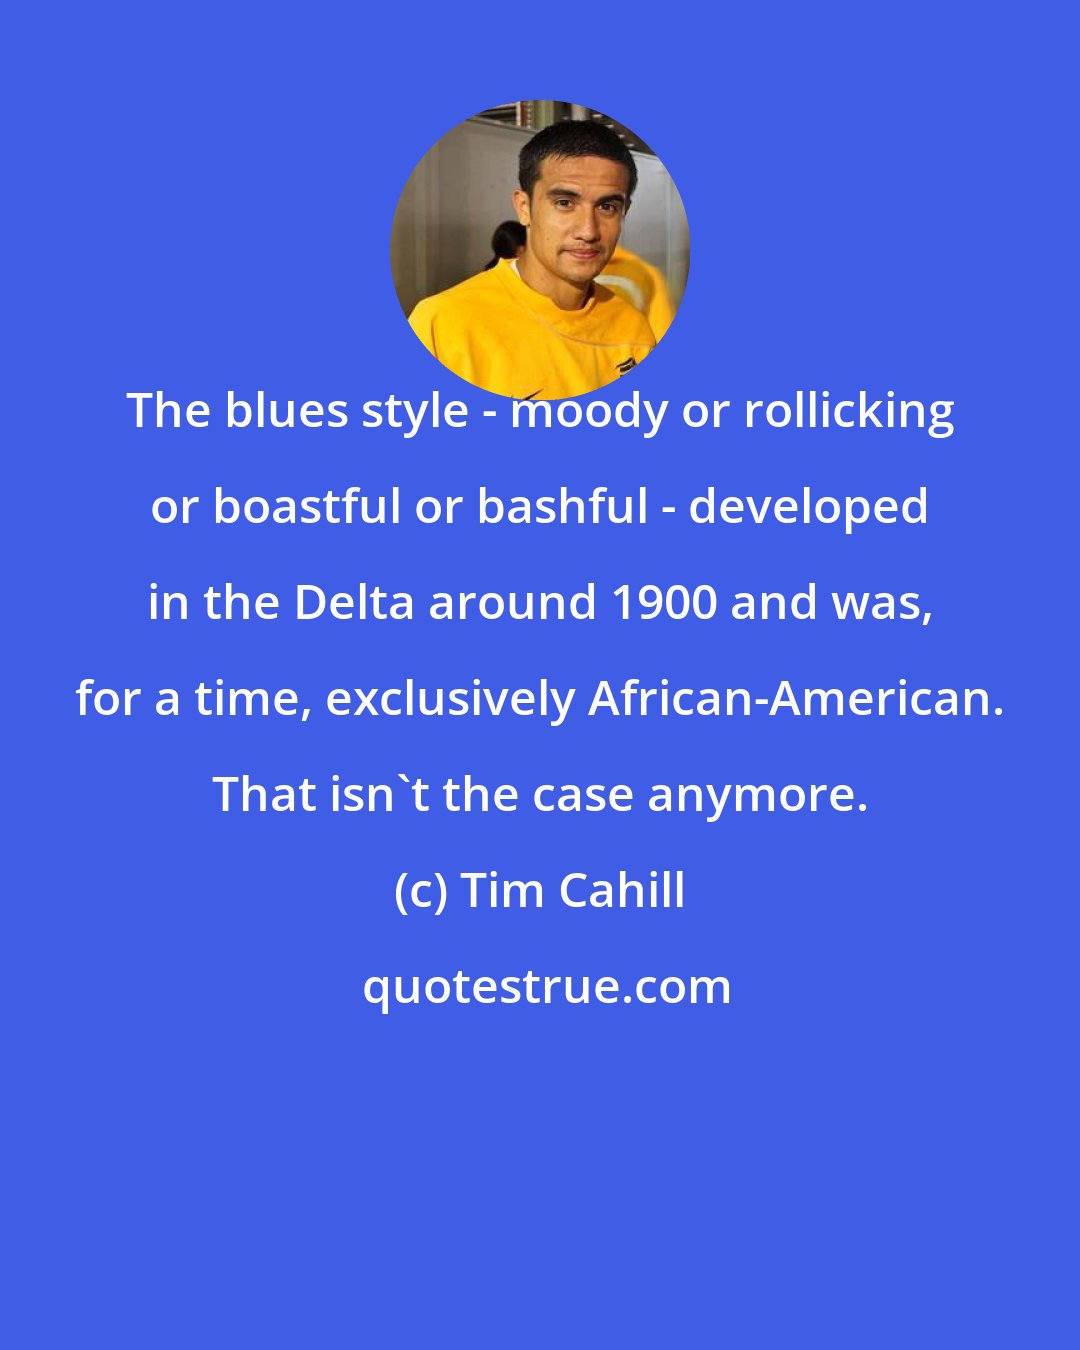 Tim Cahill: The blues style - moody or rollicking or boastful or bashful - developed in the Delta around 1900 and was, for a time, exclusively African-American. That isn't the case anymore.